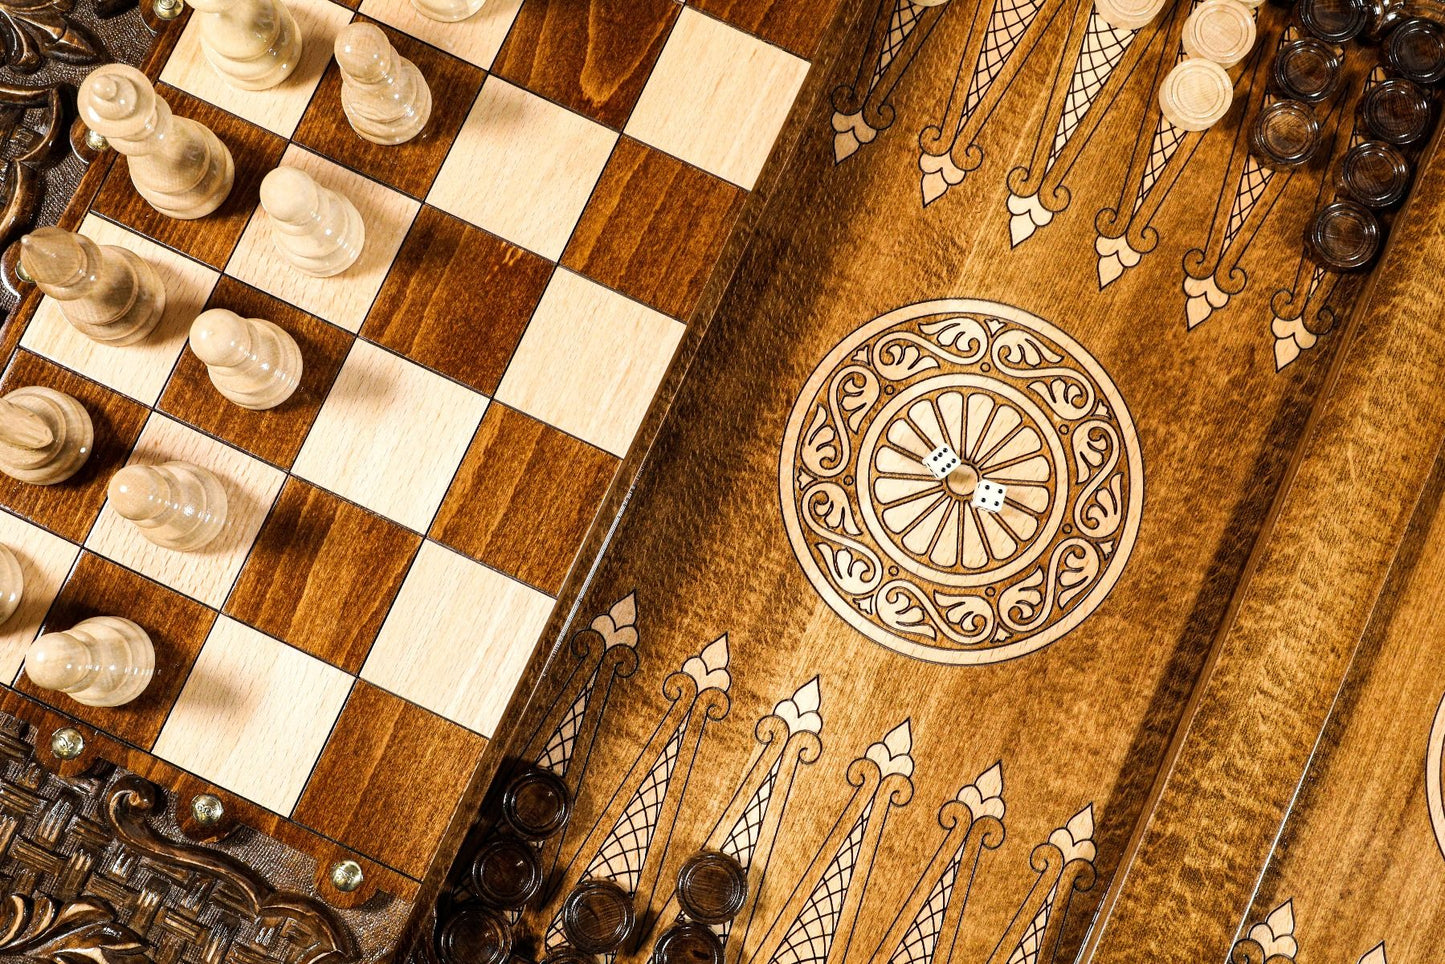 Opulent Dual-Play: Luxury Chess and Backgammon Table